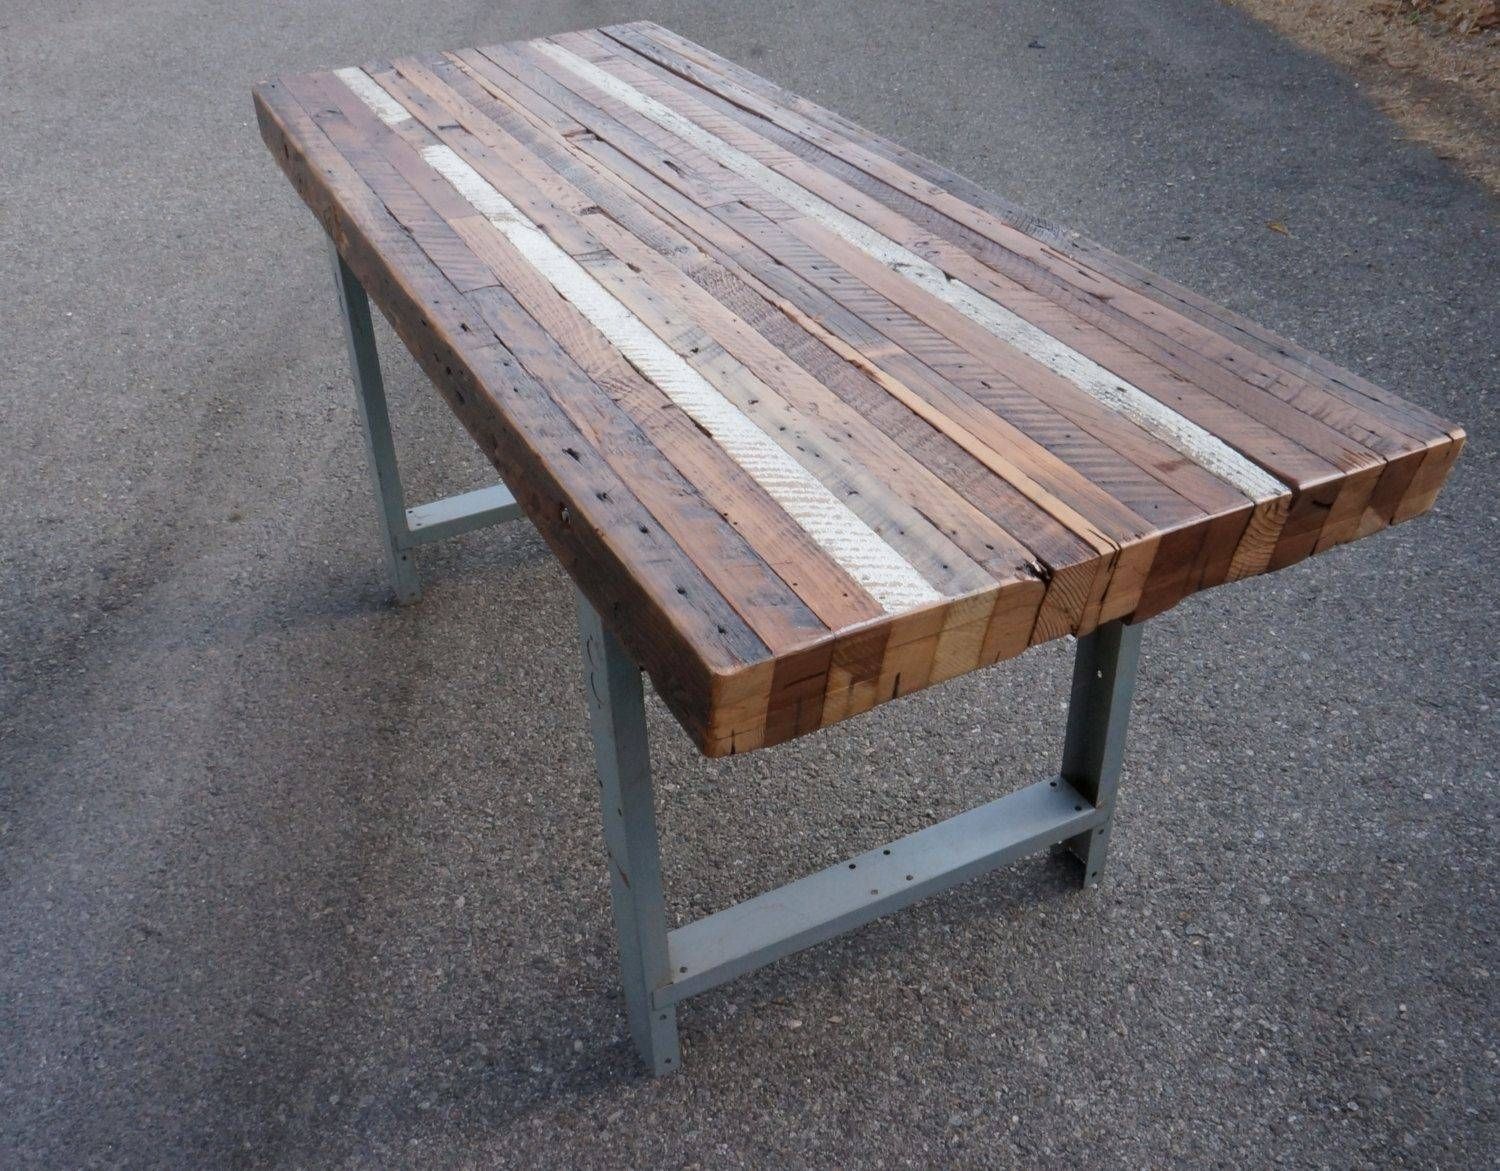 Garden Coffee Table Wood – Gallery Image Capudocs Pertaining To Wooden Garden Coffee Tables (View 23 of 30)